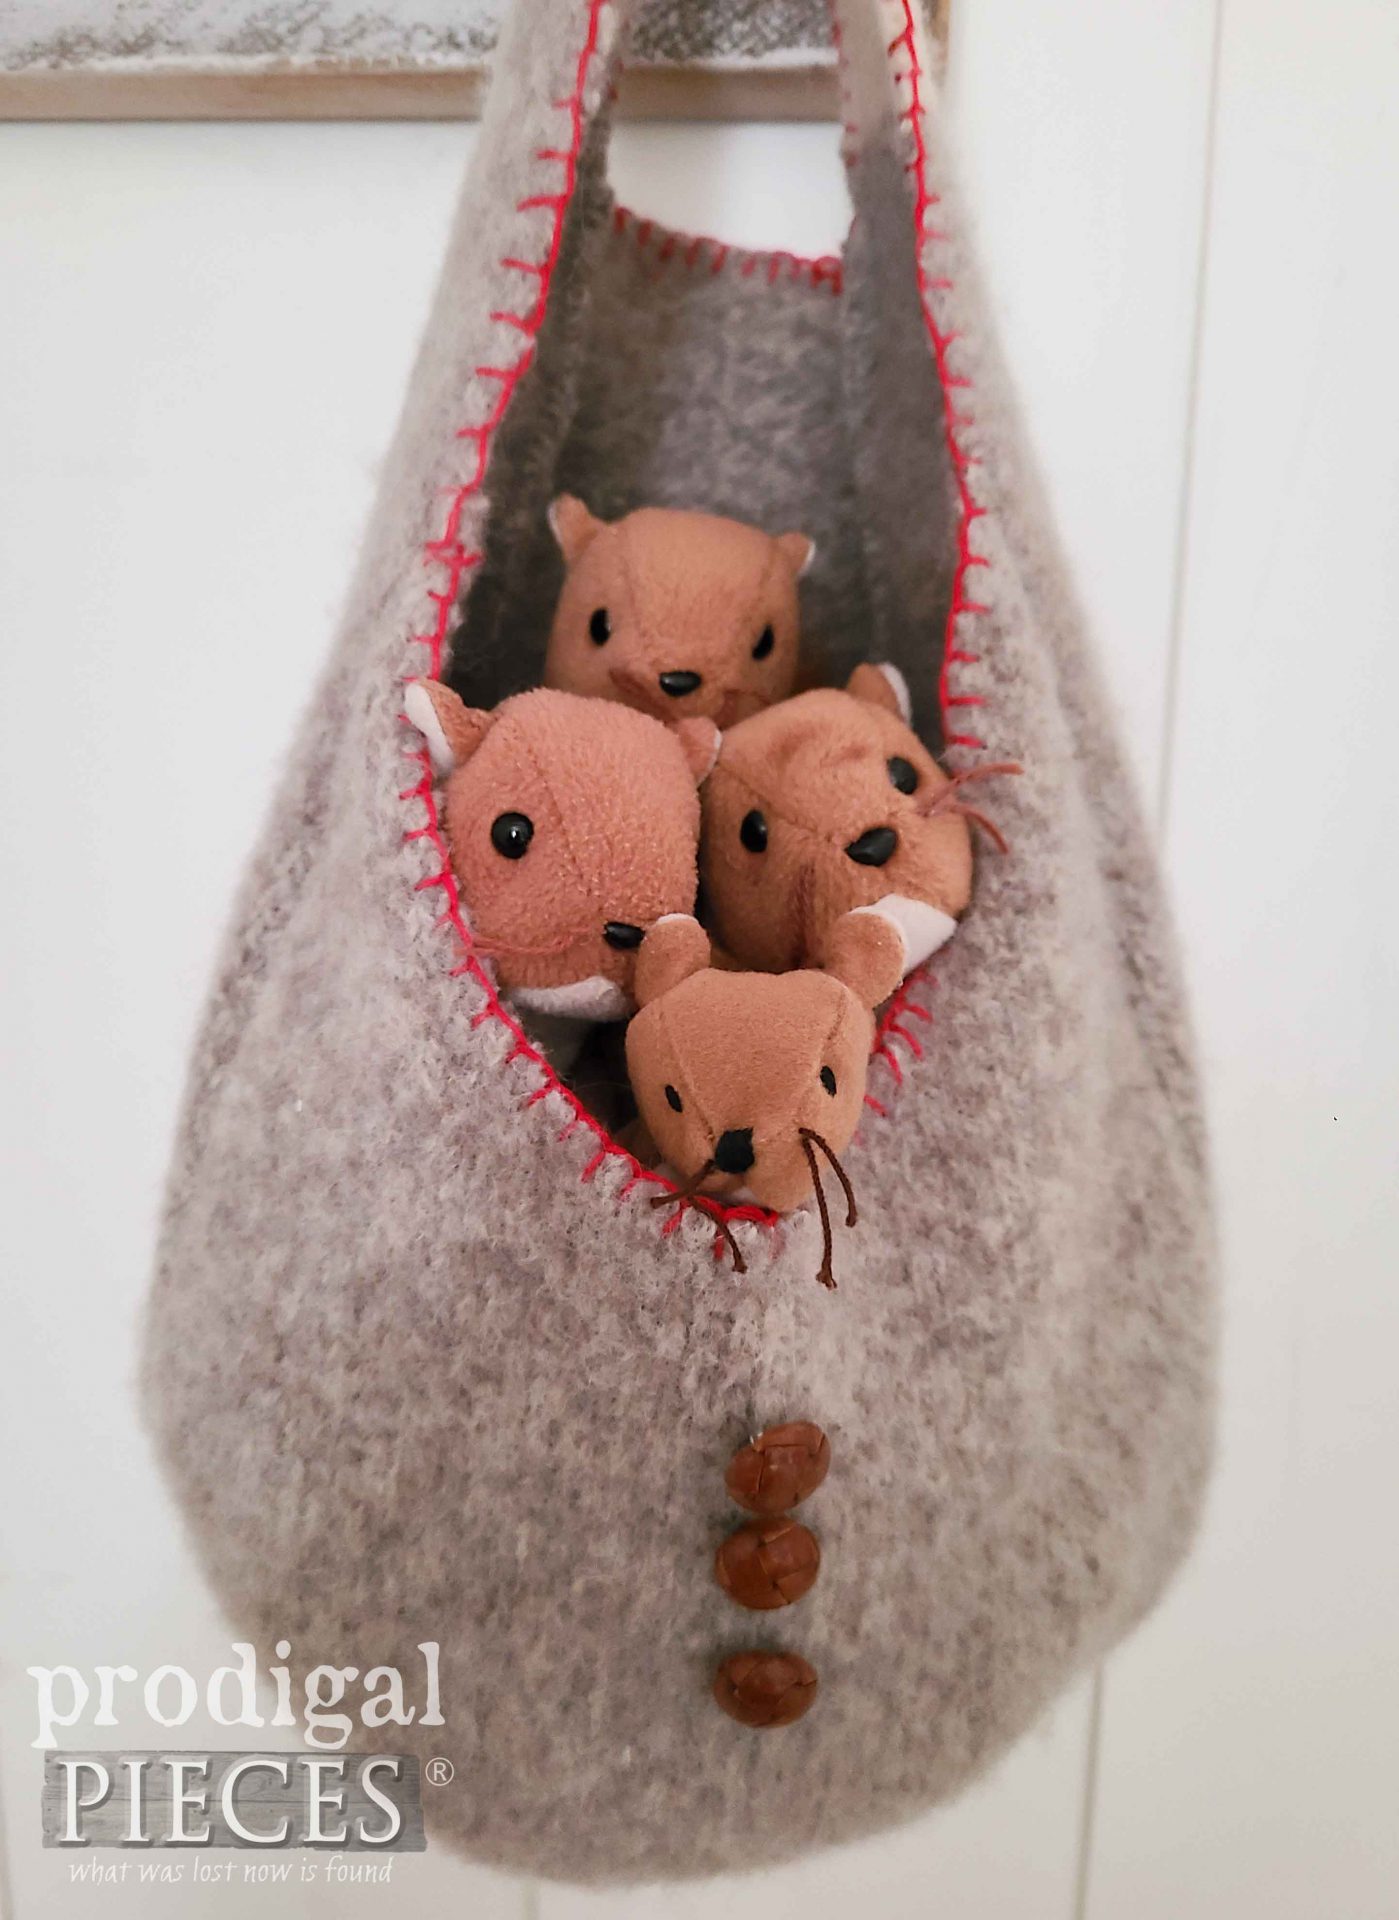 Toy Squirrels in Hanging Basket | prodigalpieces.com #prodigalpieces #toys